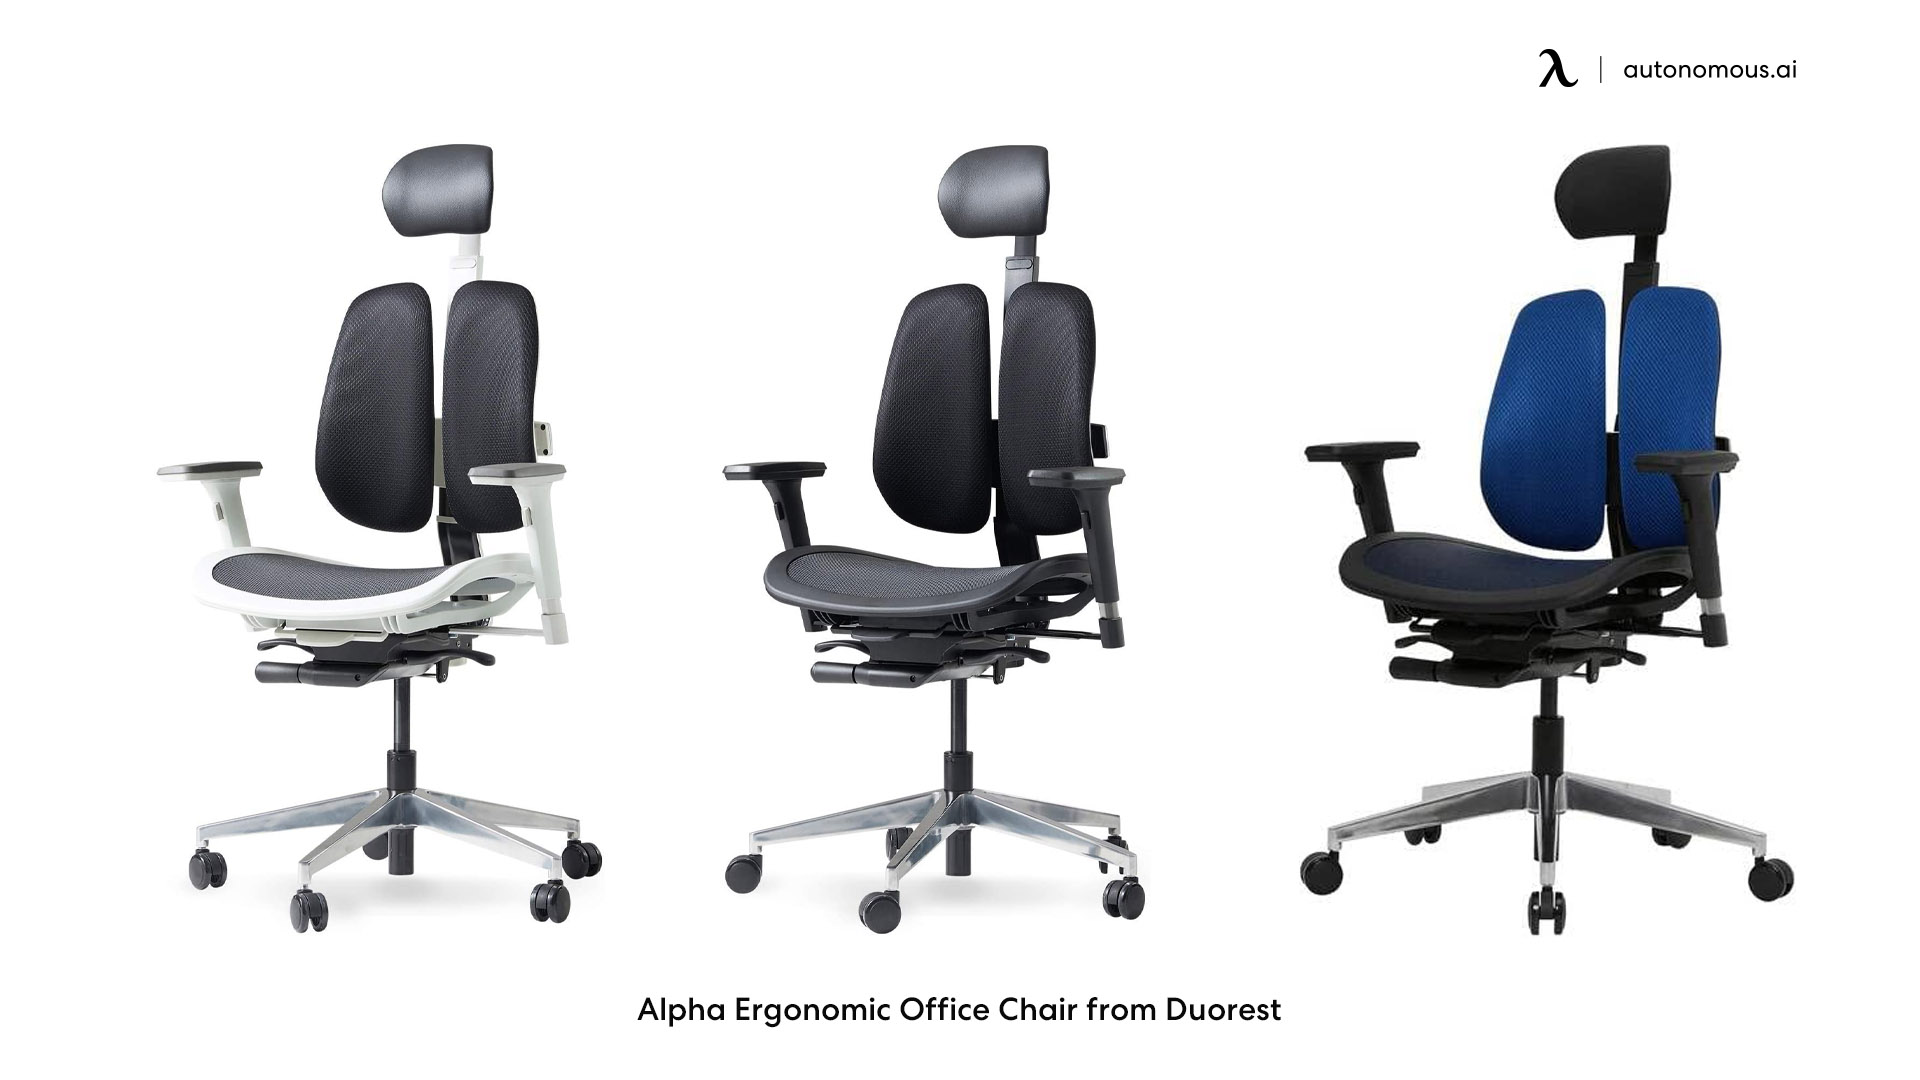 Alpha Ergonomic Office Chair from Duorest